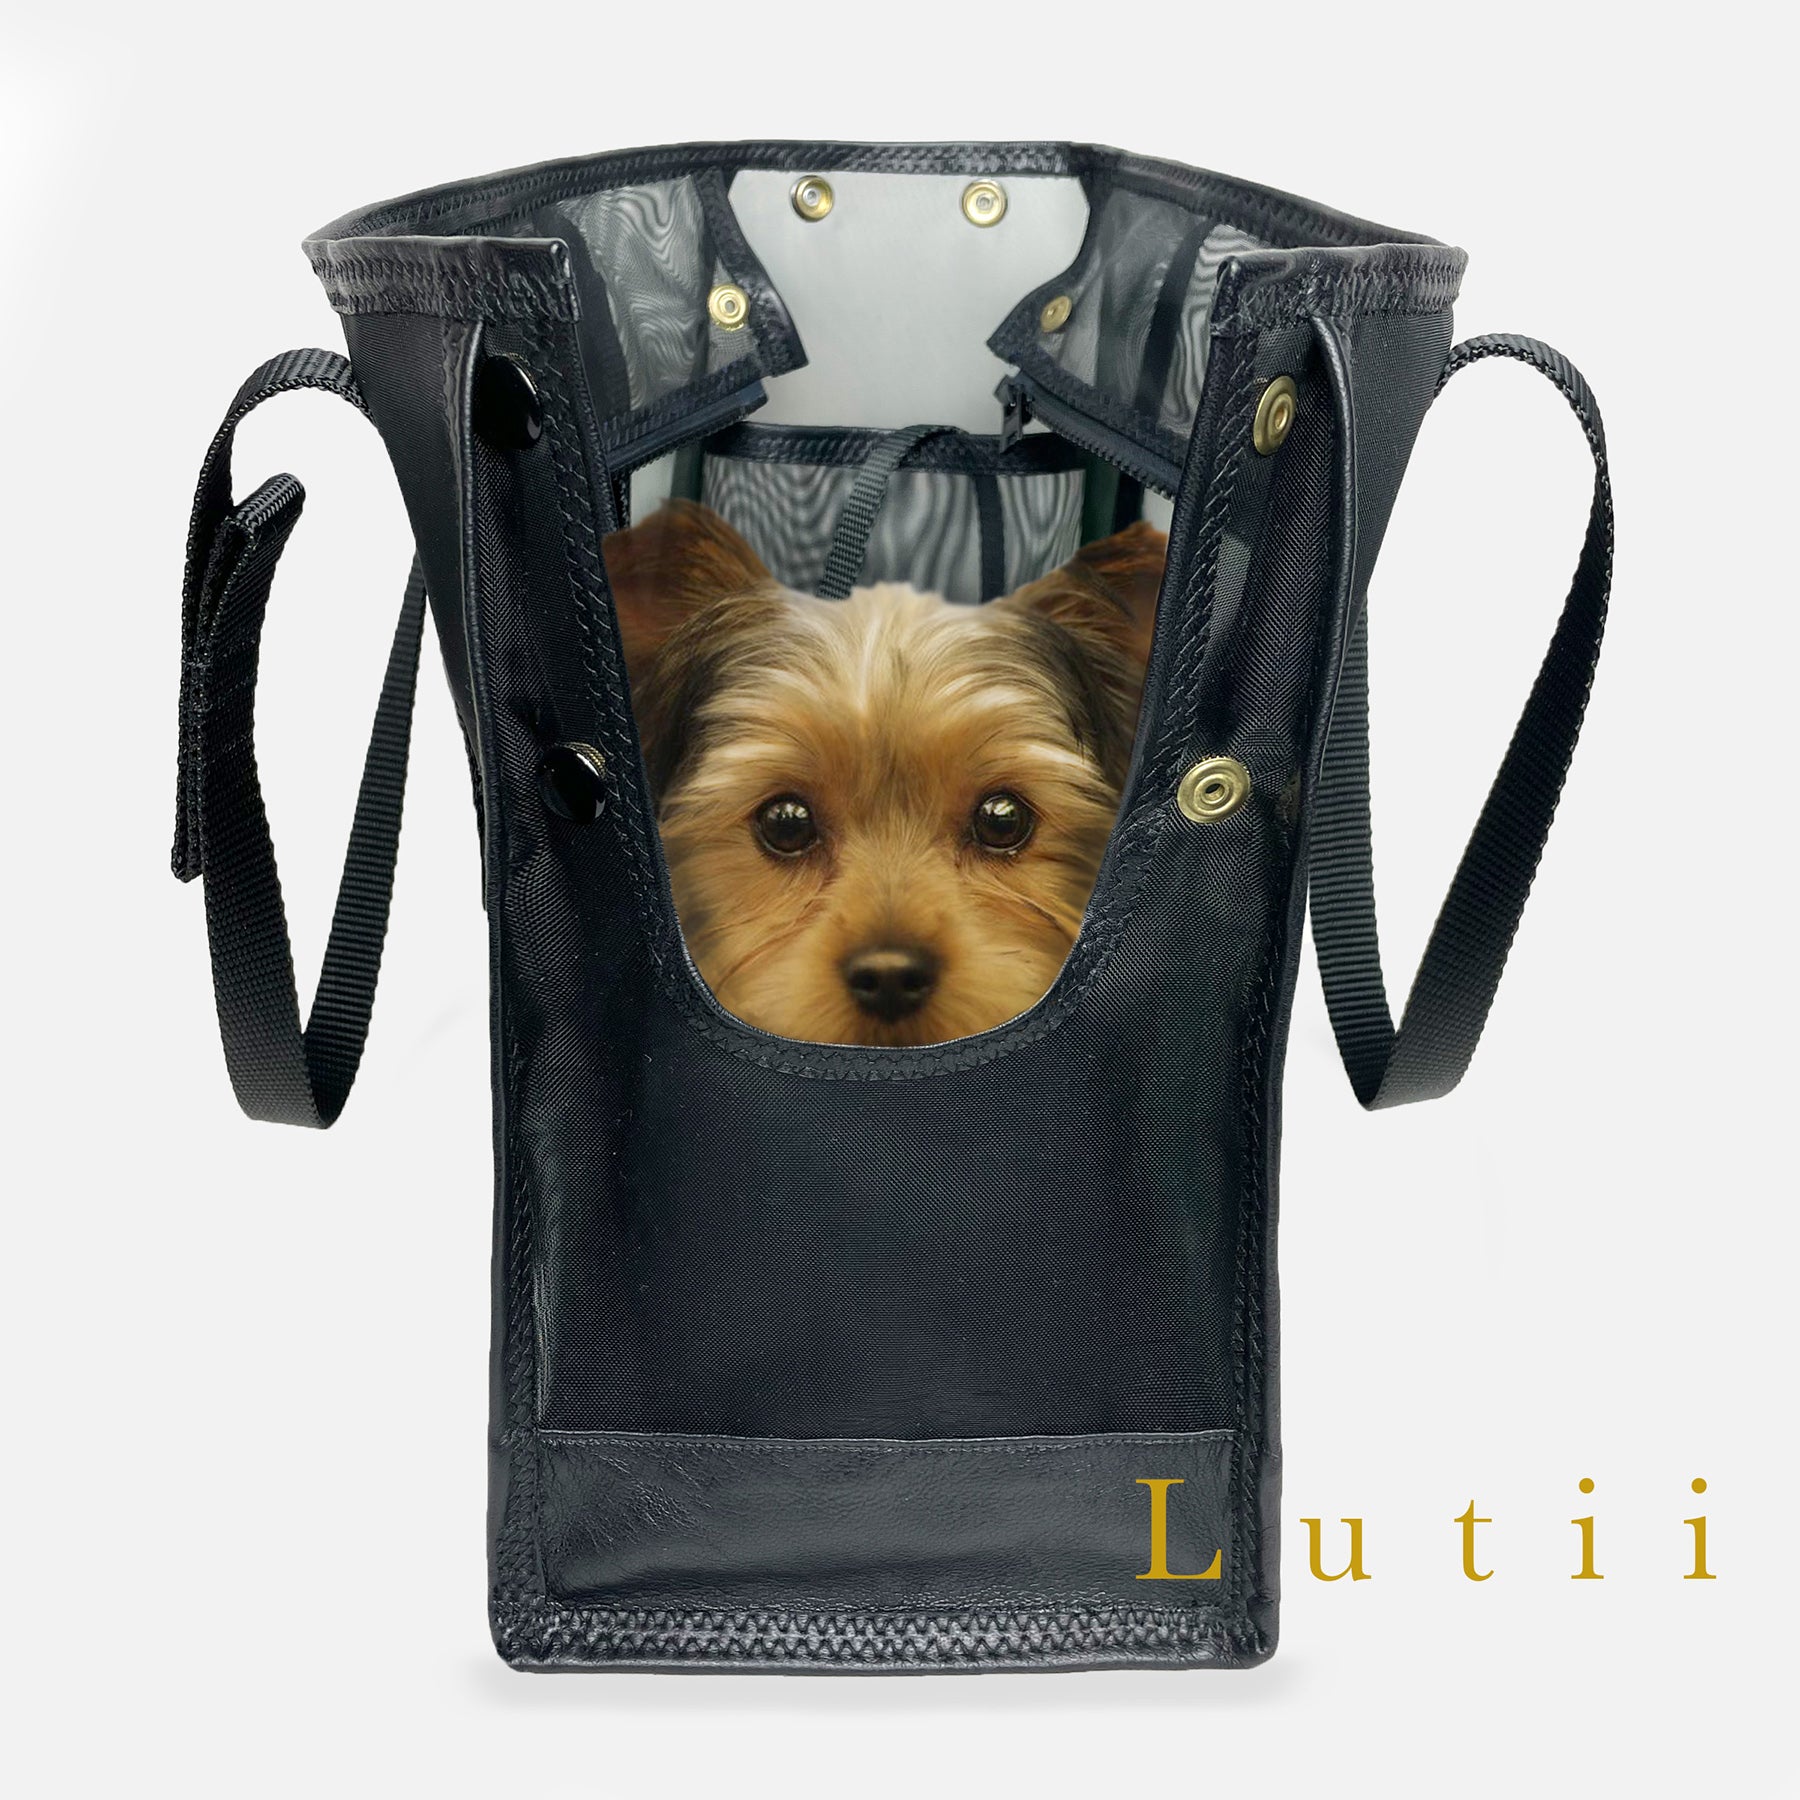 Amazon.com : NewEle Fashion Pet Carrier, Small Dog Carrier, Cat Carrier,  Quality PU Leather Dog Purse, Collapsible Portable Pet Carrying Handbag for  Travel Walking Hiking - Black : Pet Supplies